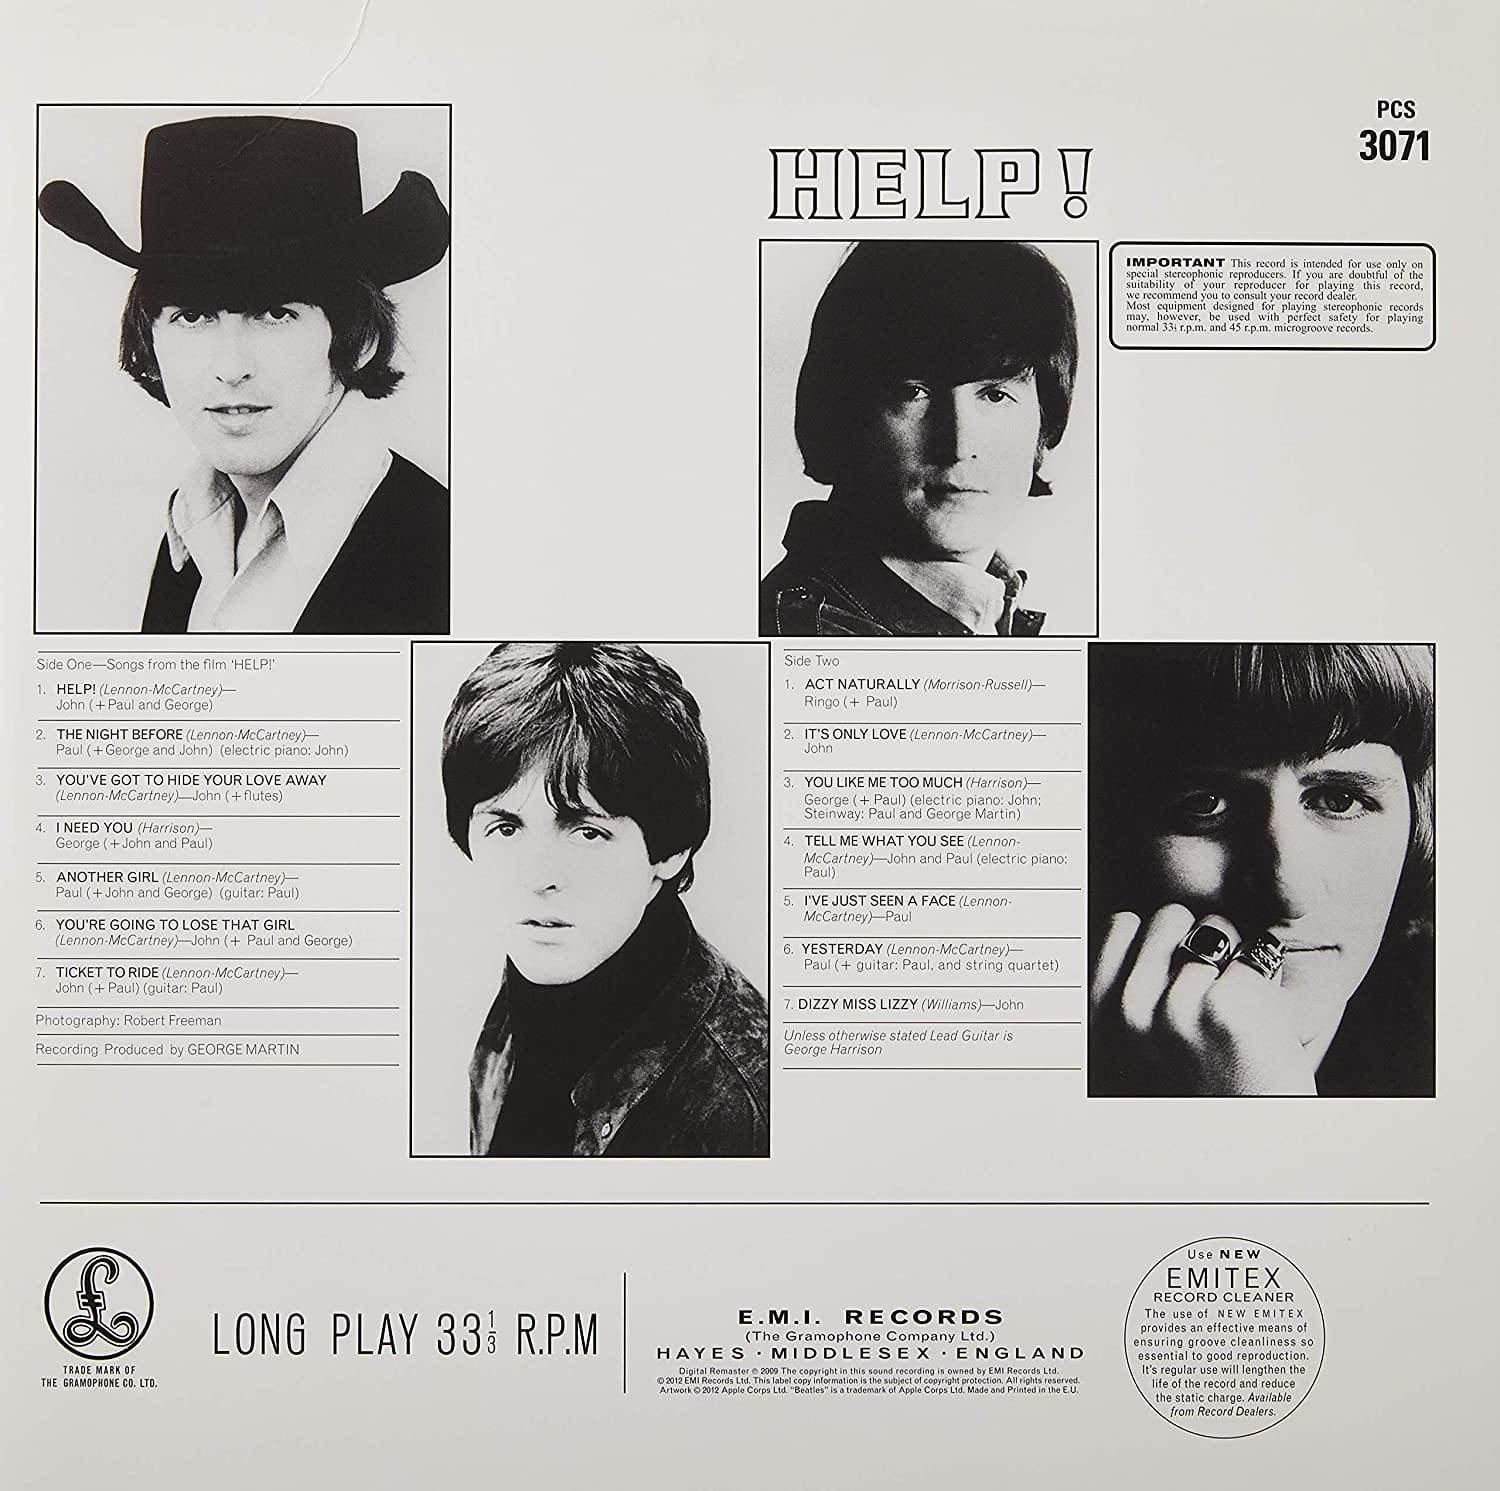 The Beatles - Help! (Limited, Remastered, 180 Gram) (LP) - Joco Records